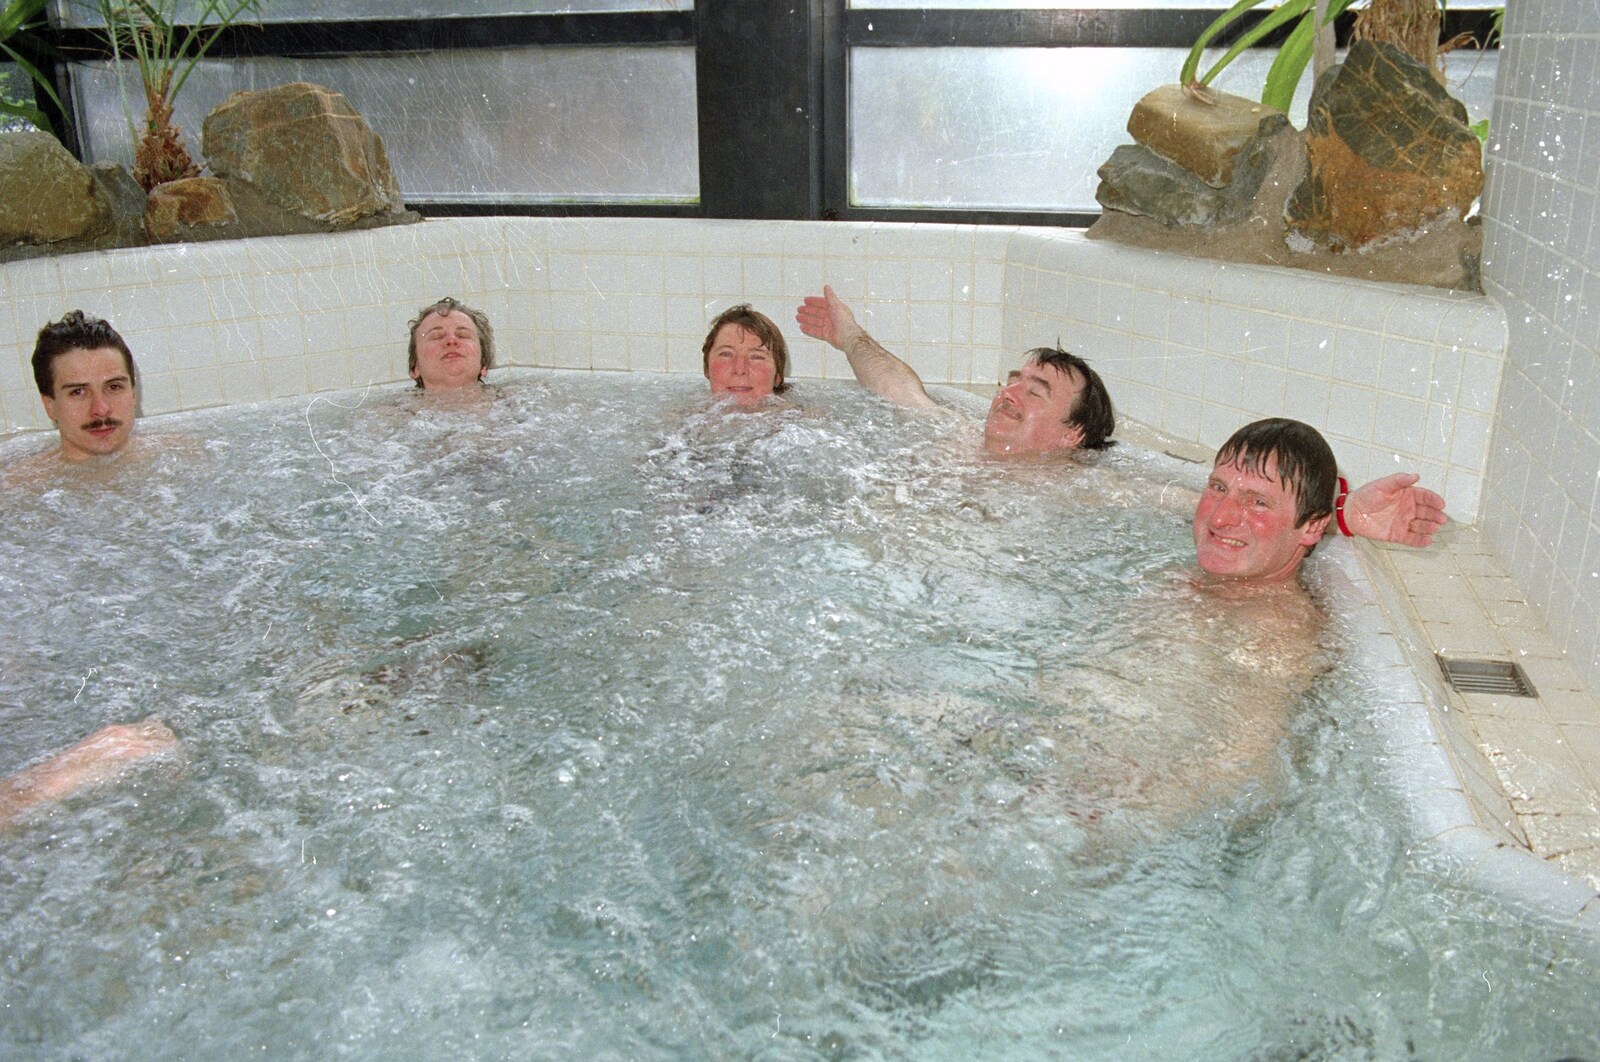 A Trip to Center Parcs, Eemhof, Netherlands - 24th March 1992: Life in a jacuzzi